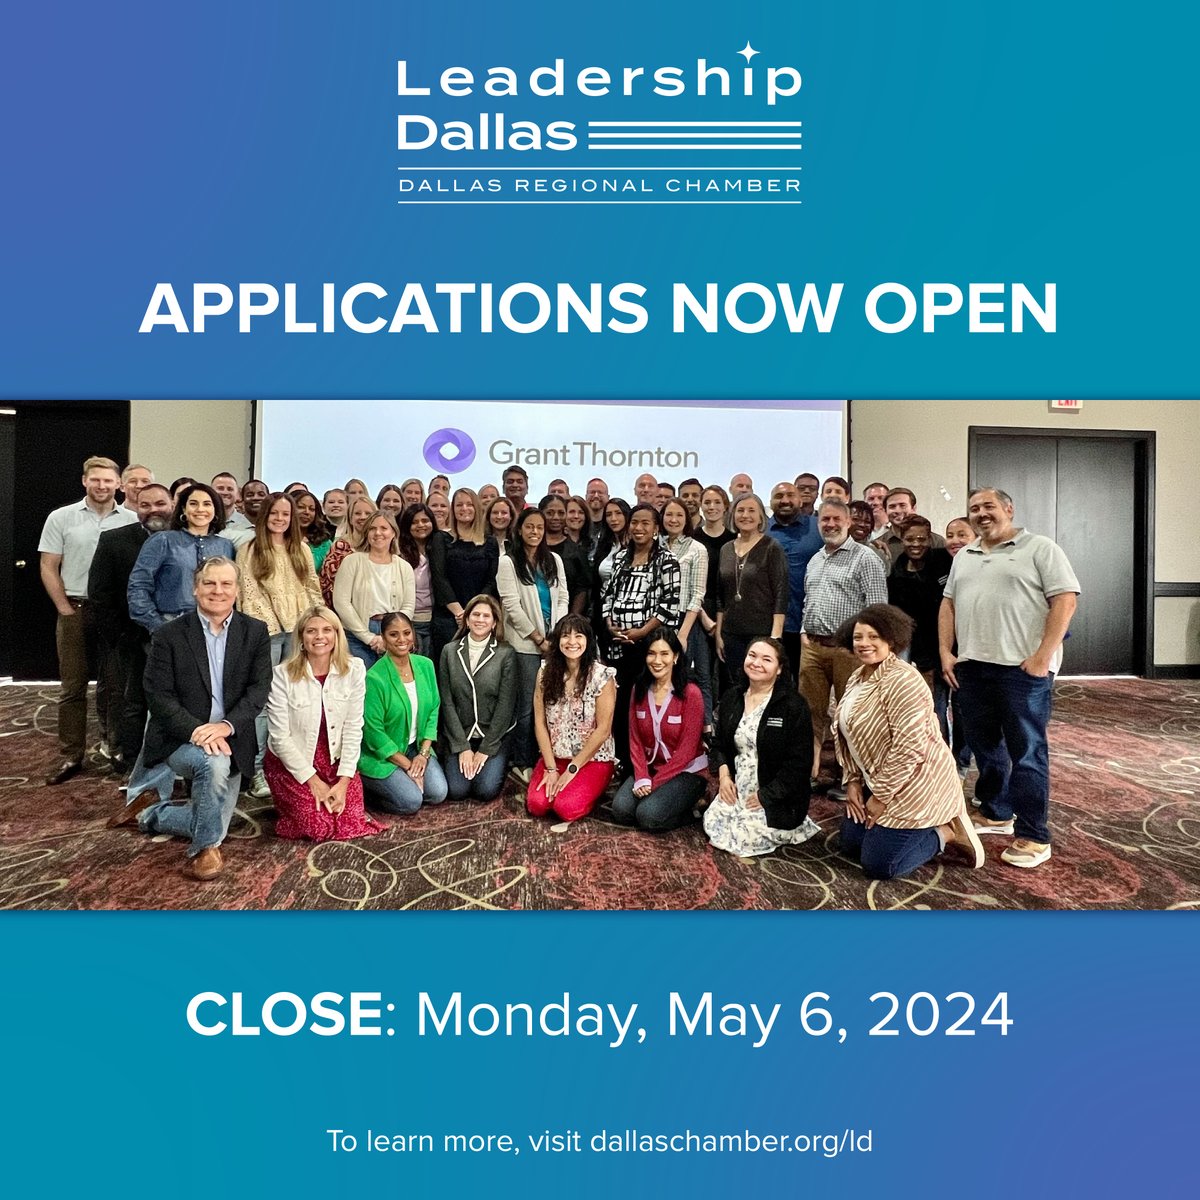 Listen in as @clawrenceDFW of @wfaa describes his time taking part in a recent Leadership Dallas Class Day. bit.ly/3PS7XXX Applications for Leadership Dallas are open – apply today! bit.ly/4368rPk